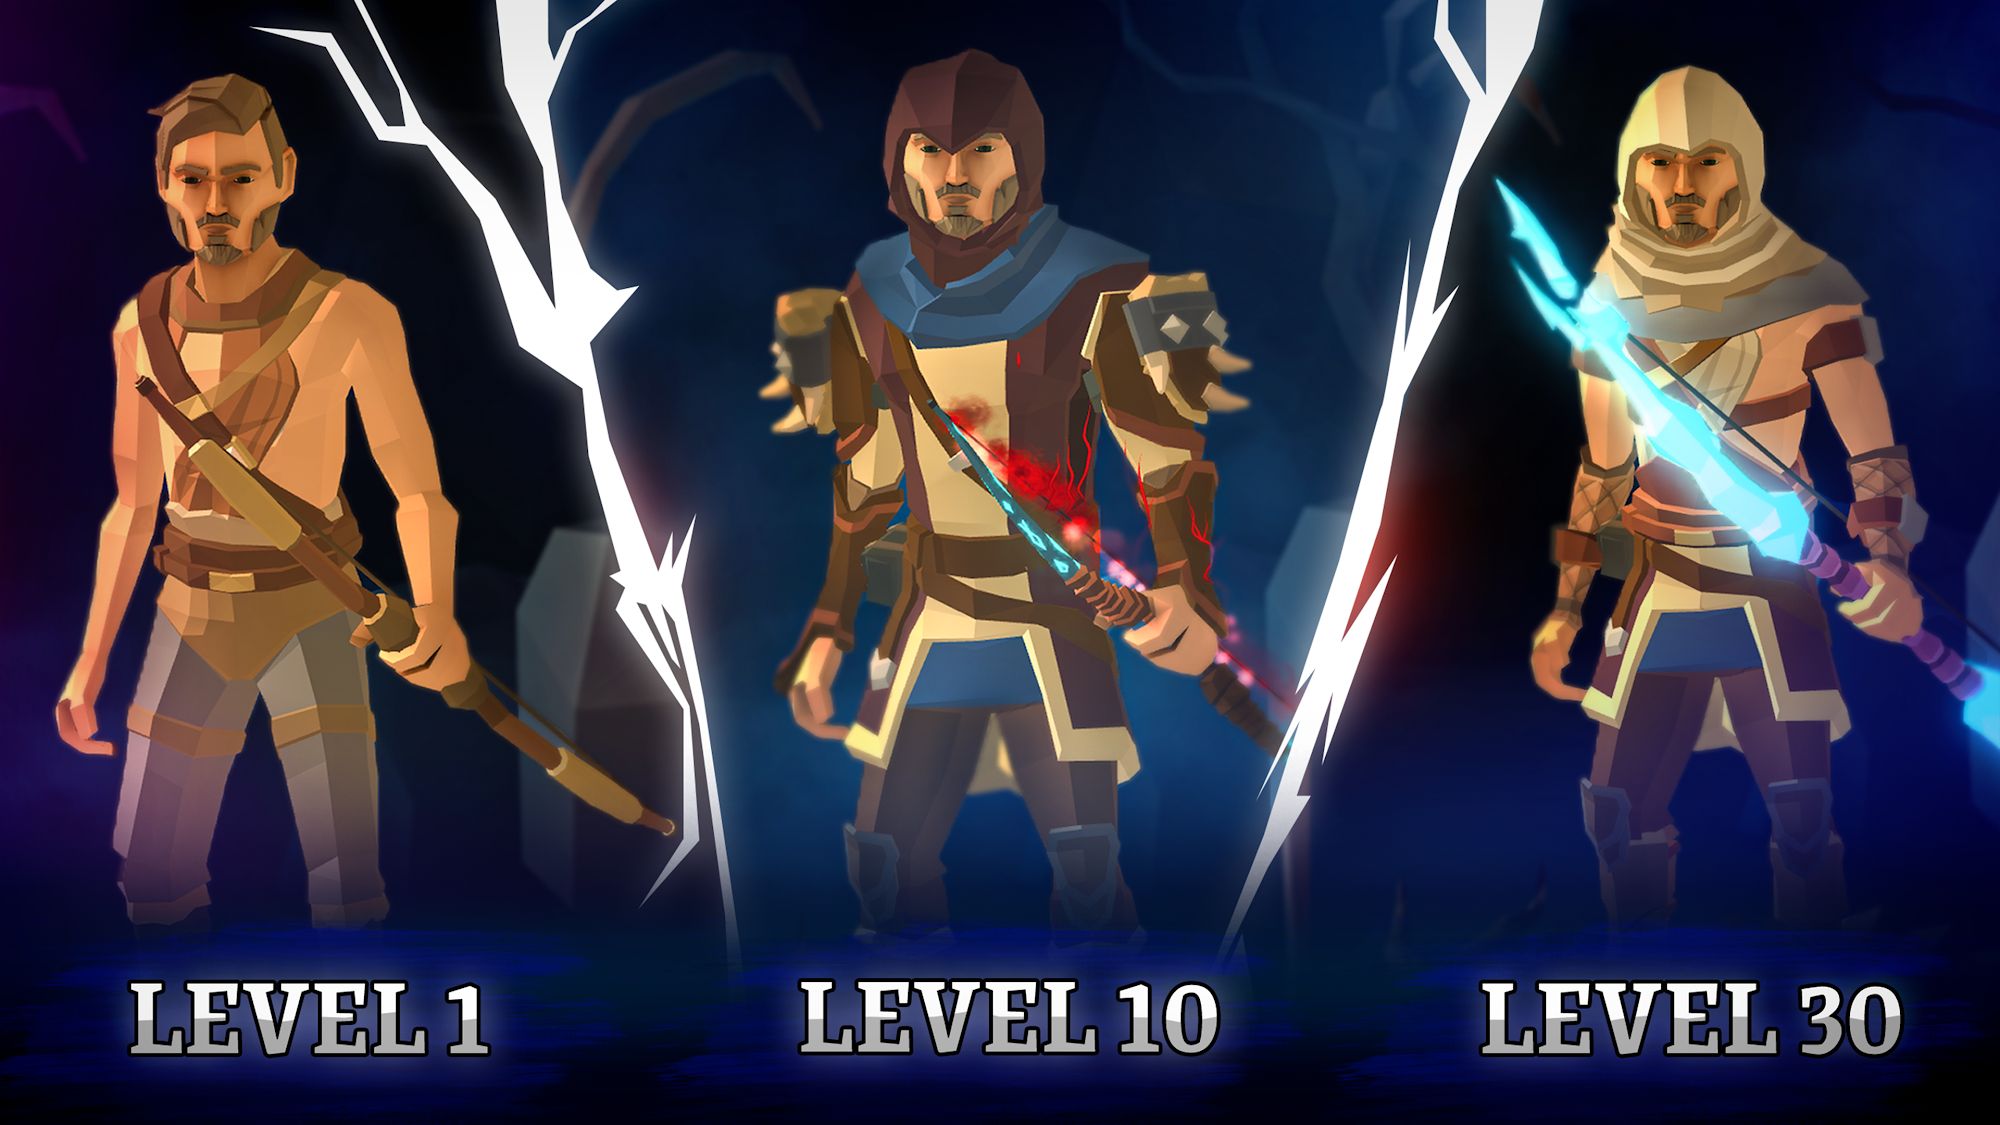 Download Polygon Fantasy: Diablo-like Action RPG Android free game.